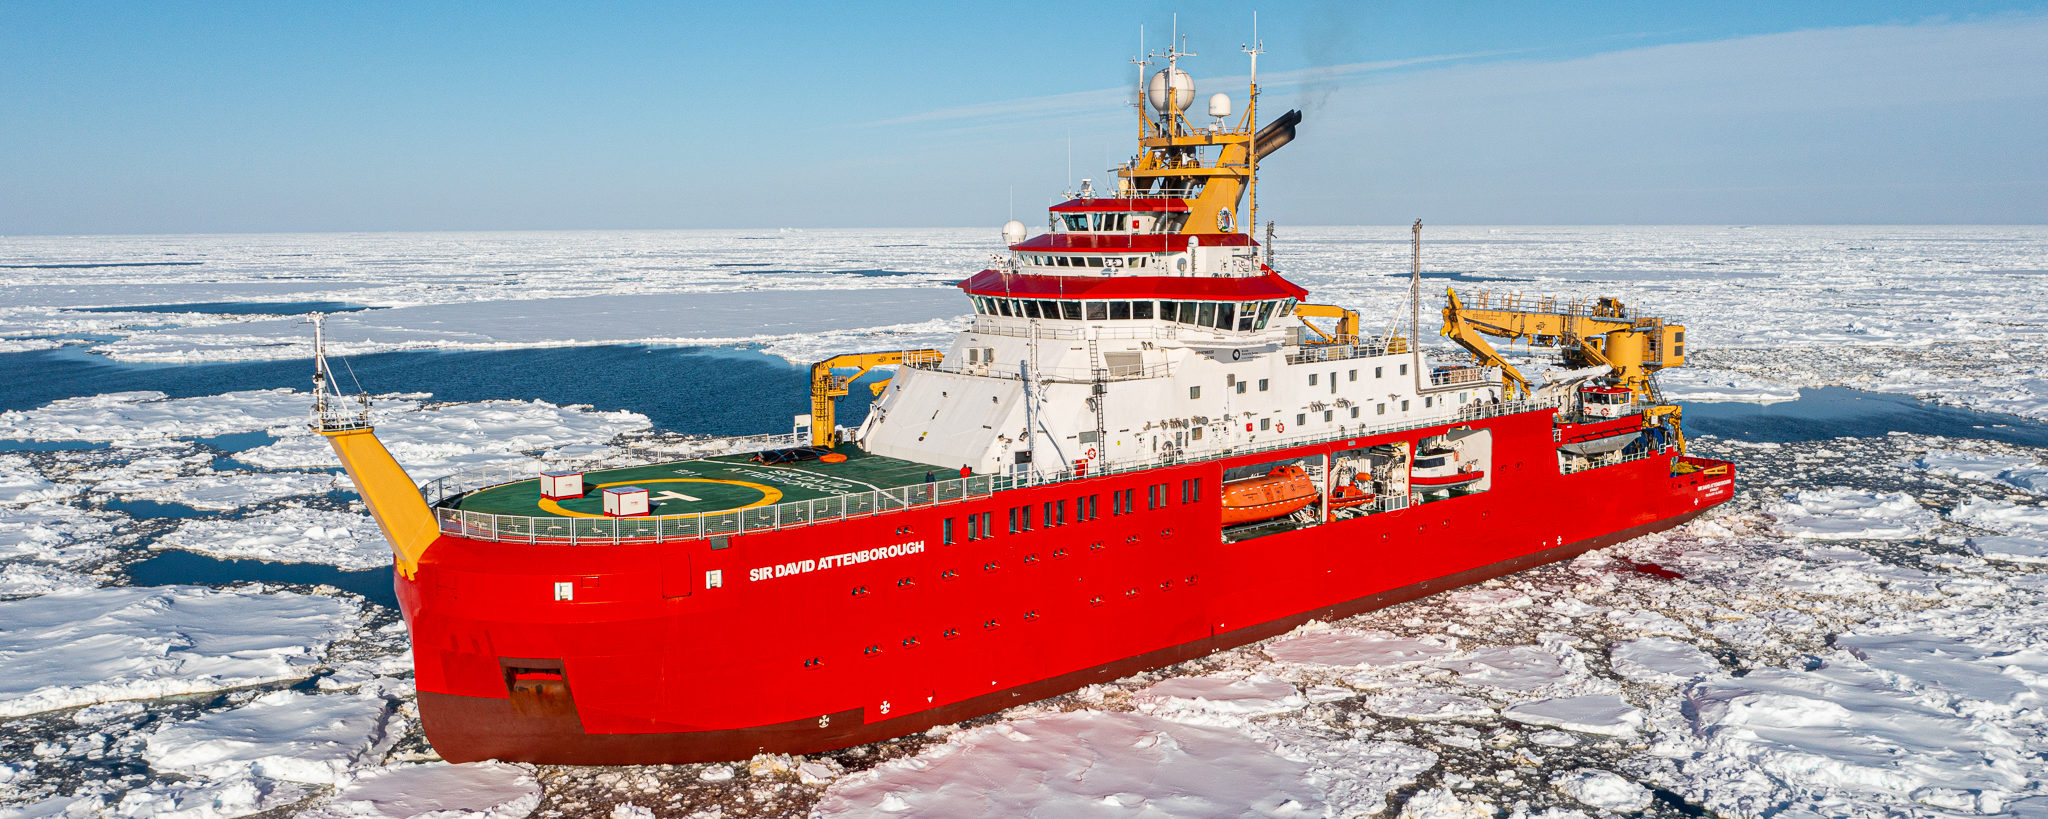 A large red ship in the ocean which is covered in bits of ice